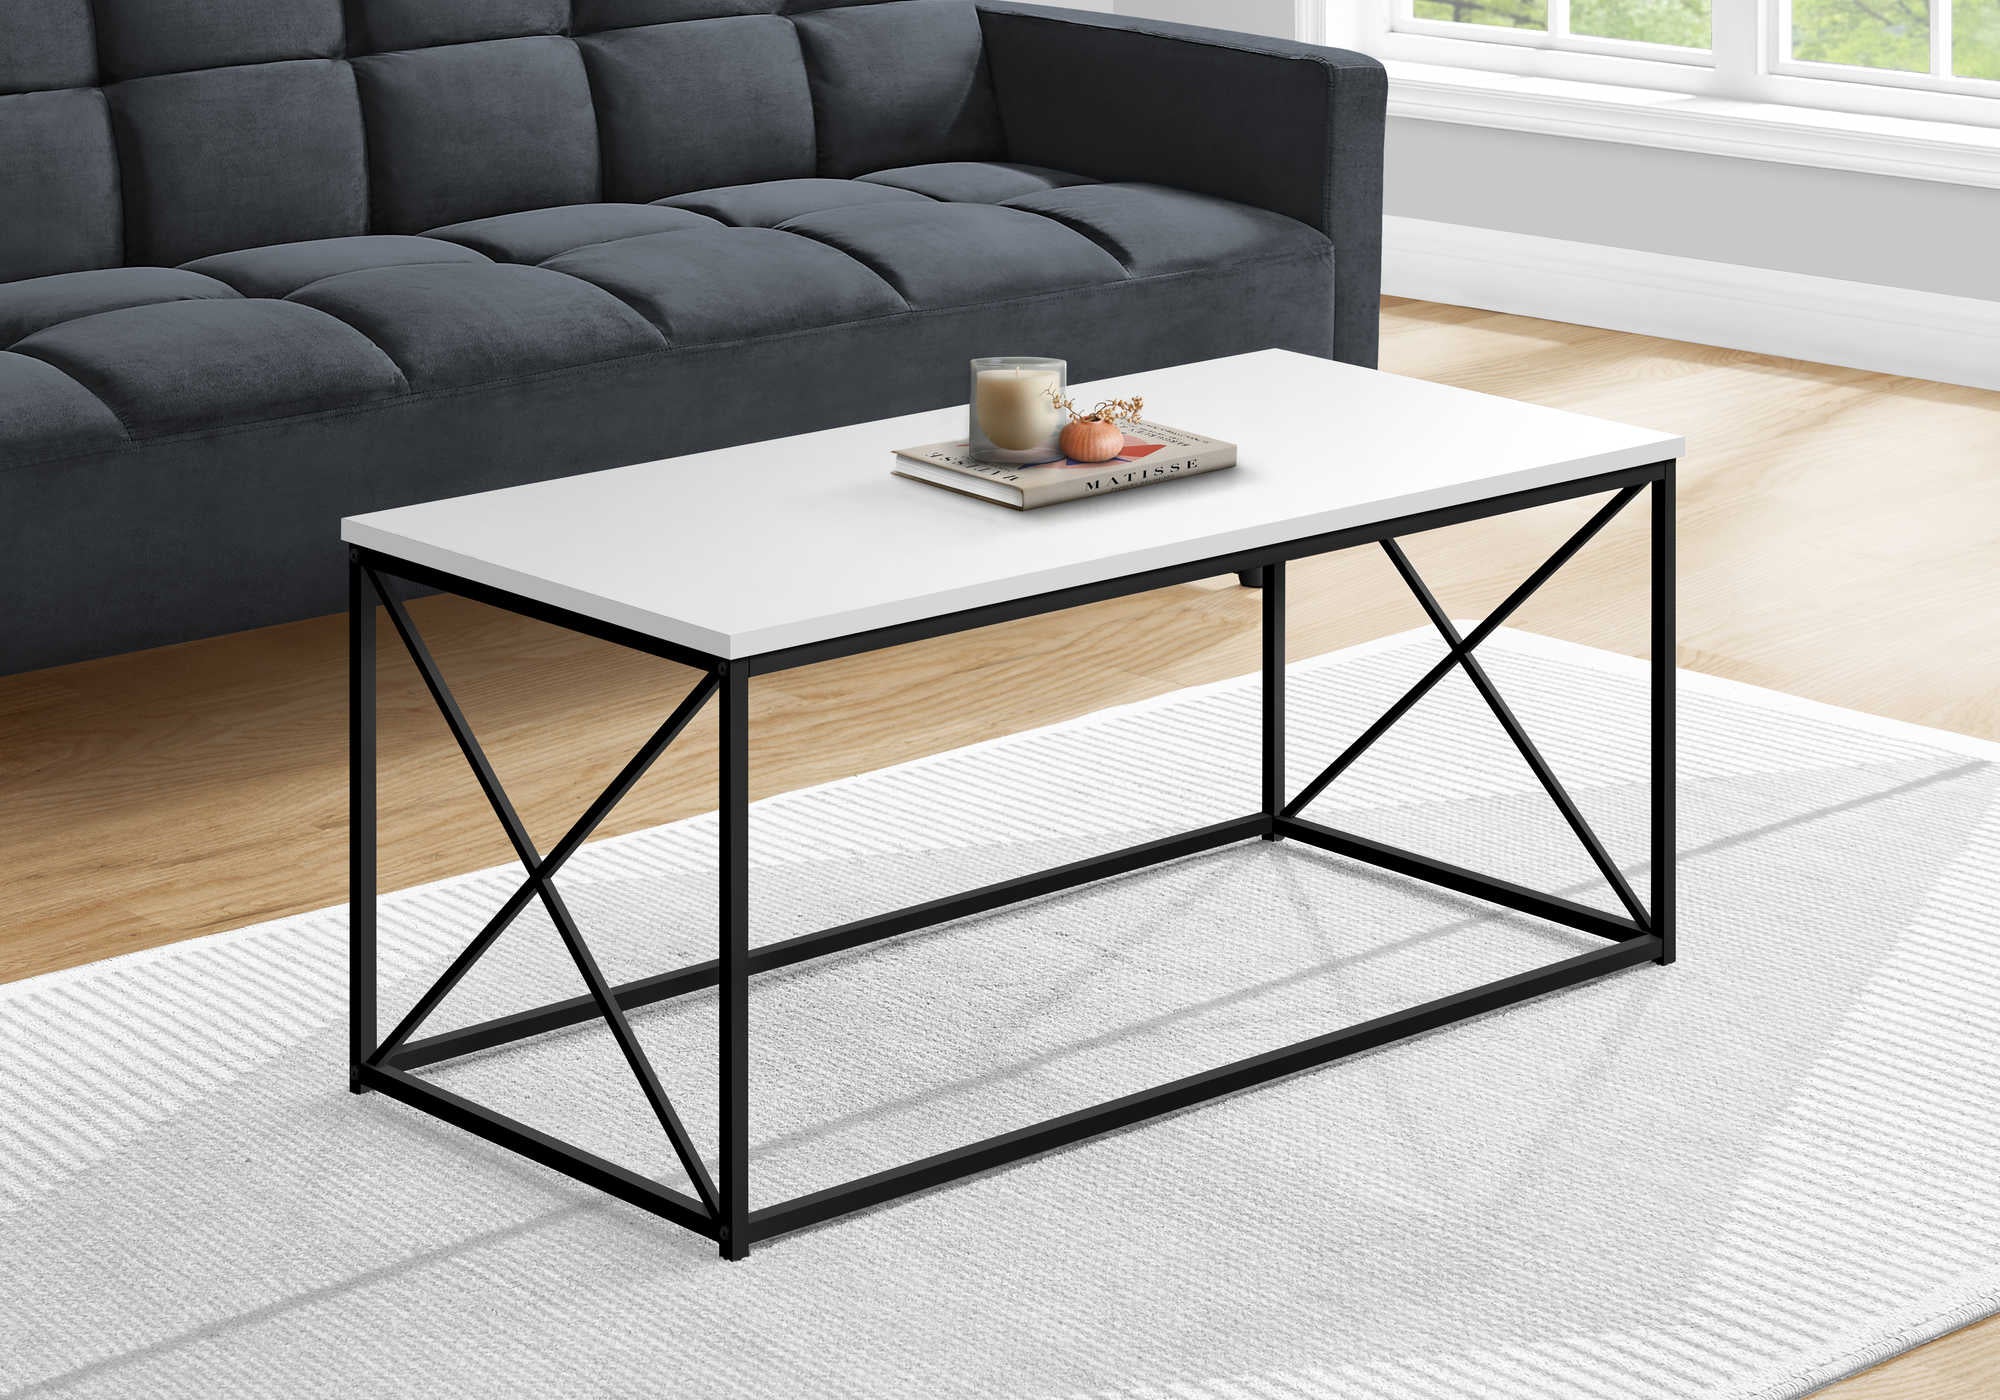 I 3780 - COFFEE TABLE - 40"L / WHITE / BLACK METAL BY MONARCH SPECIALTIES INC